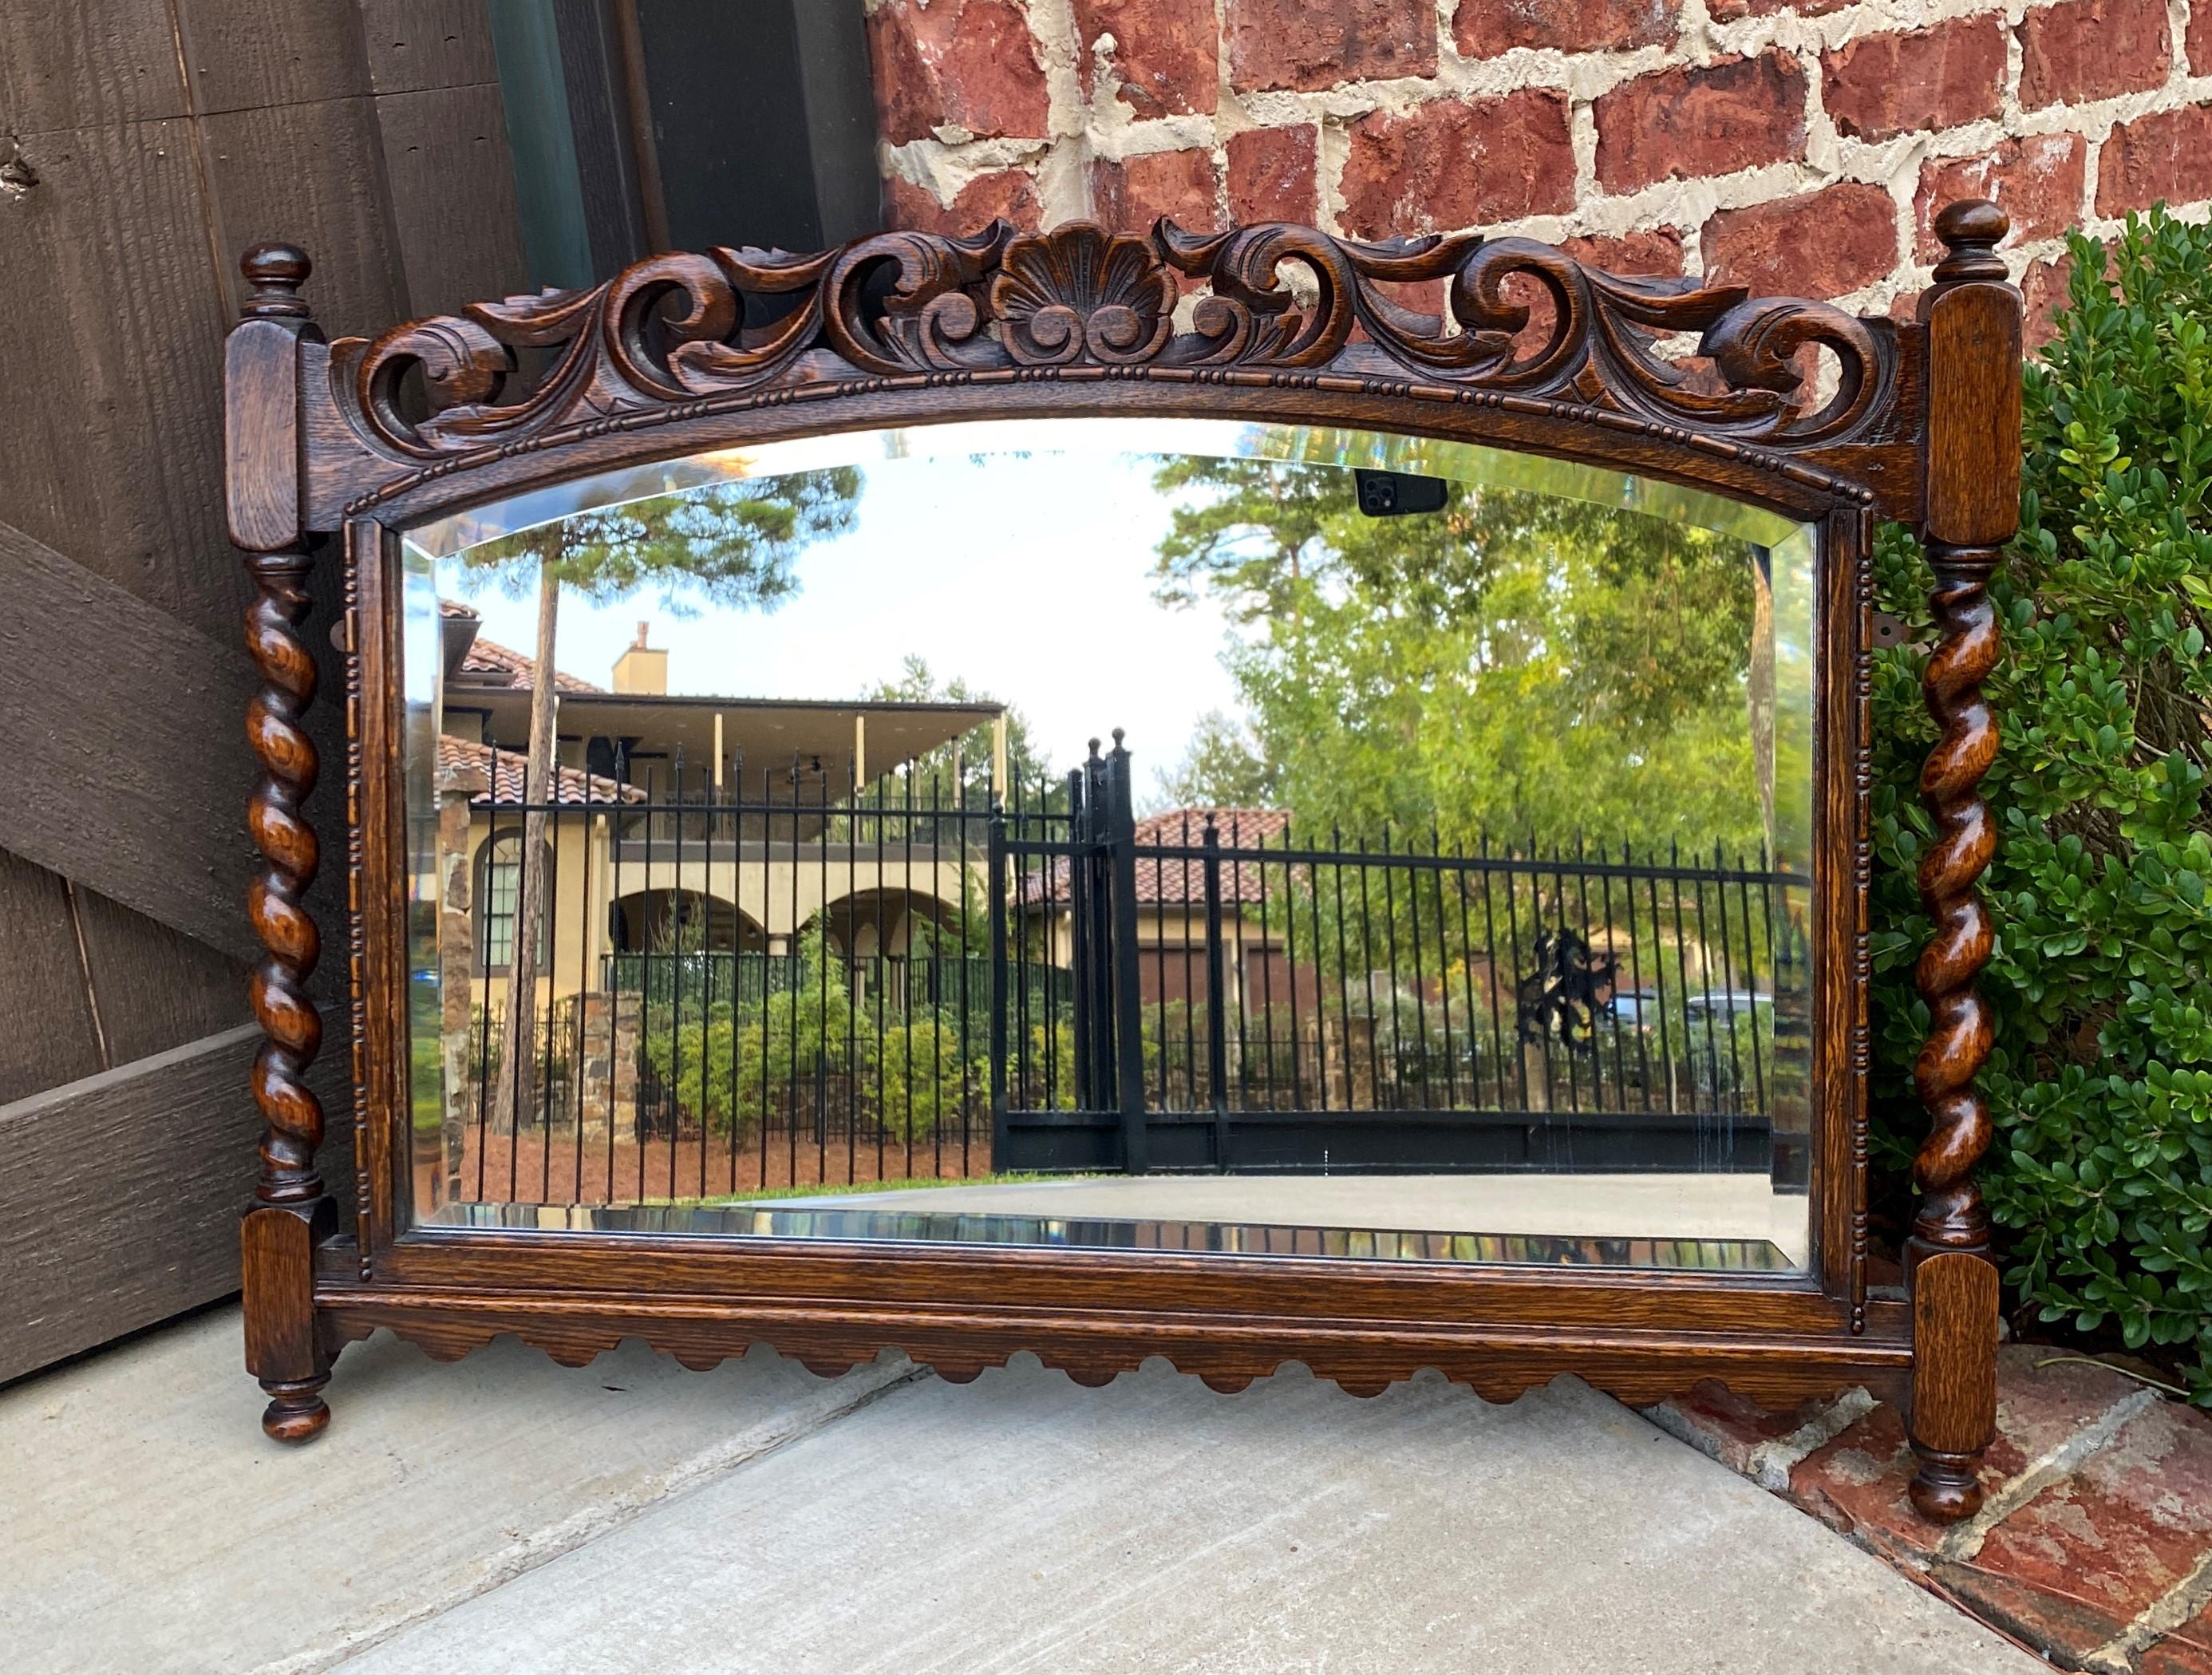 Beautiful antique English oak Jacobean style framed beveled wall mirror with carved crown and barley twist posts~~c. 1930s
 
Popular Jacobean style English framed oak beveled mirror with carved shell crown, barley twist posts and finials, 